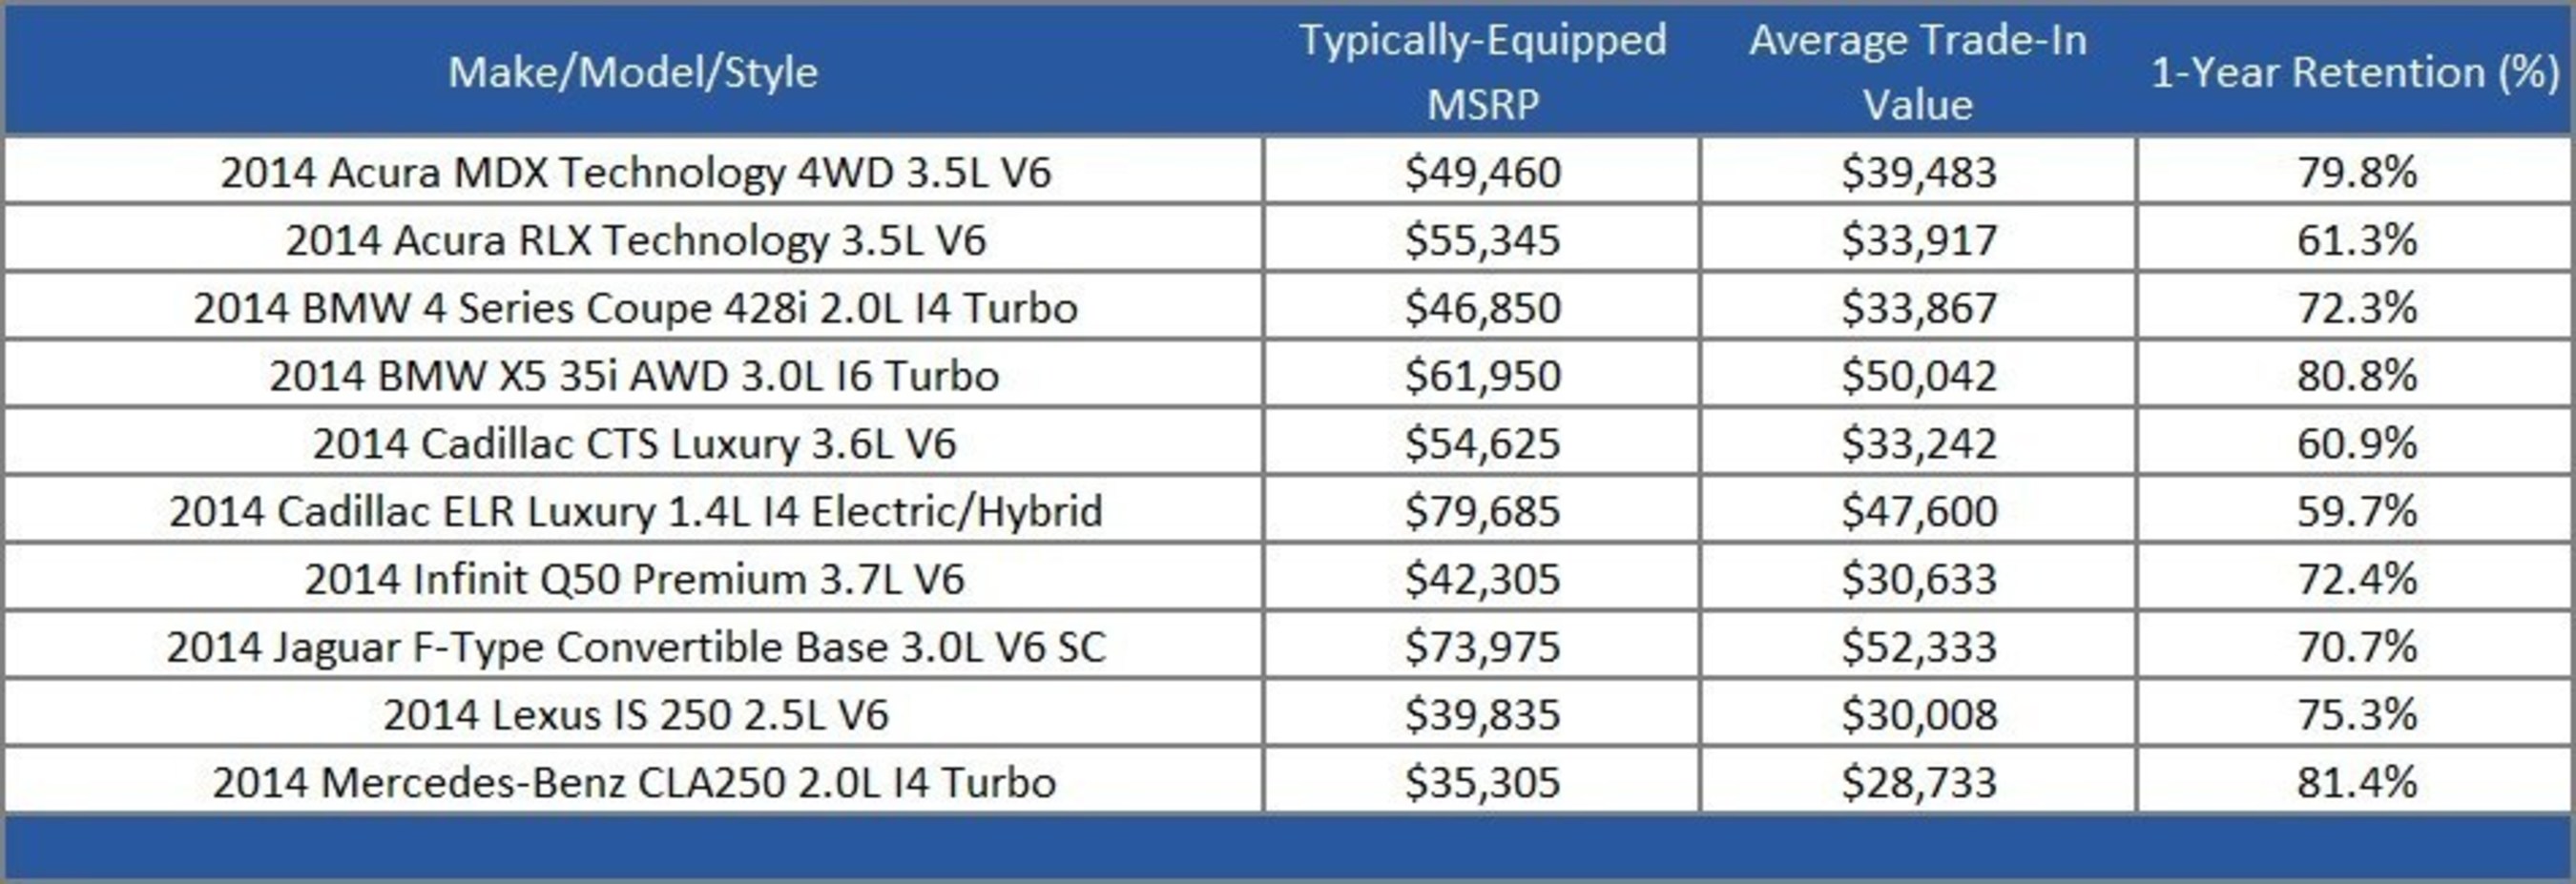 Of the 10 luxury vehicles making the Perspective report, the 2014 Mercedes-Benz CLA 250 had the lowest typically-equipped MSRP ($35,305). The full report listing all values, how the retention figures were calculated, and vehicle-specific information can be downloaded for free on the NADA Used Car Guide website at, http://www.nada.com/b2b